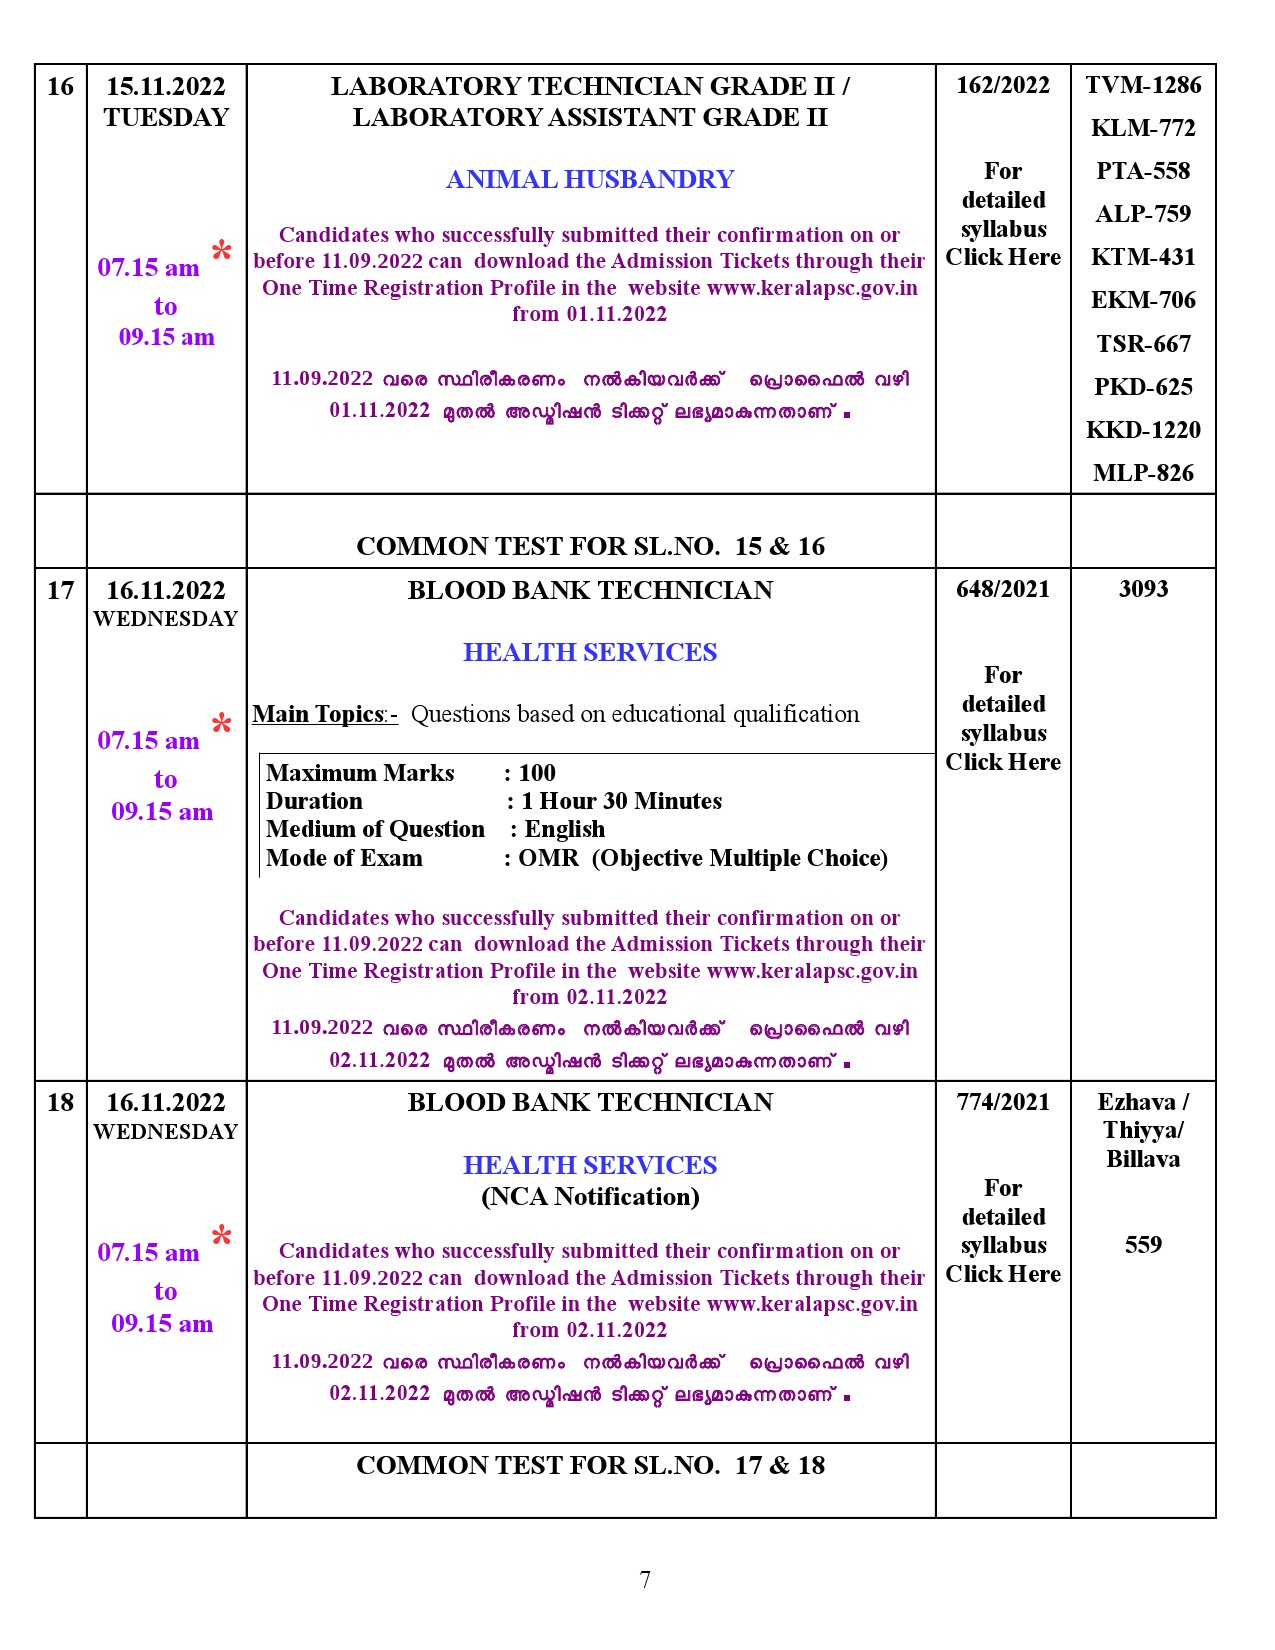 EXAMINATION PROGRAMME FOR THE MONTH OF NOVEMBER 2022 AFTER CONFIRMATION - Notification Image 7